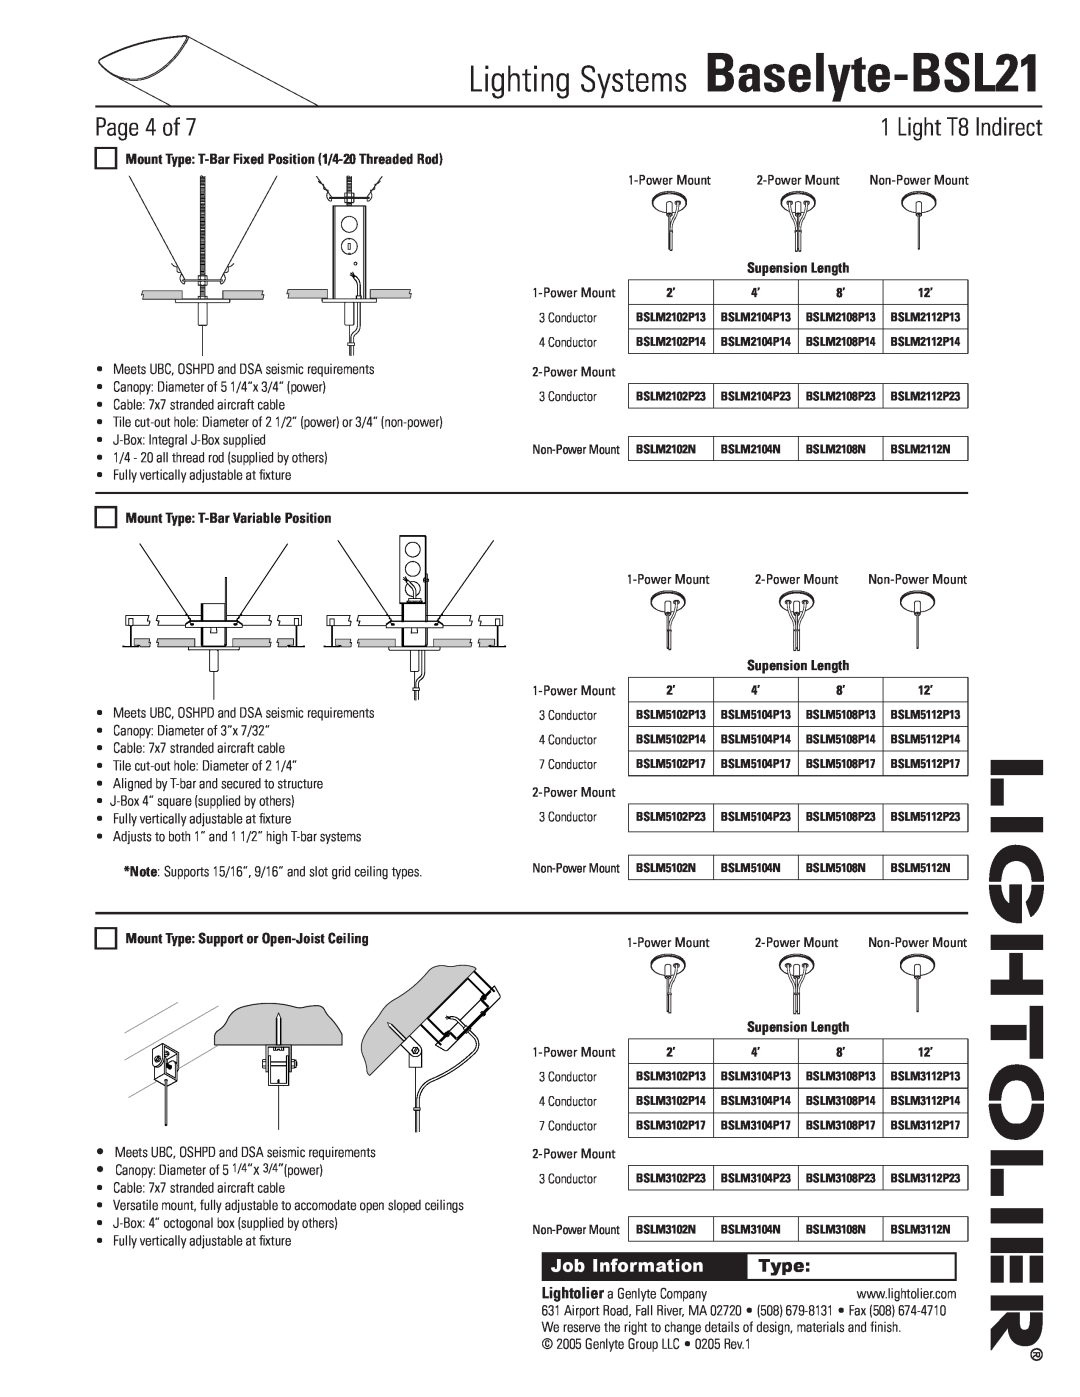 Lightolier Baselyte-BSL21 Mount Type T-BarVariable Position, Mount Type: Support or Open-JoistCeiling, Page of 